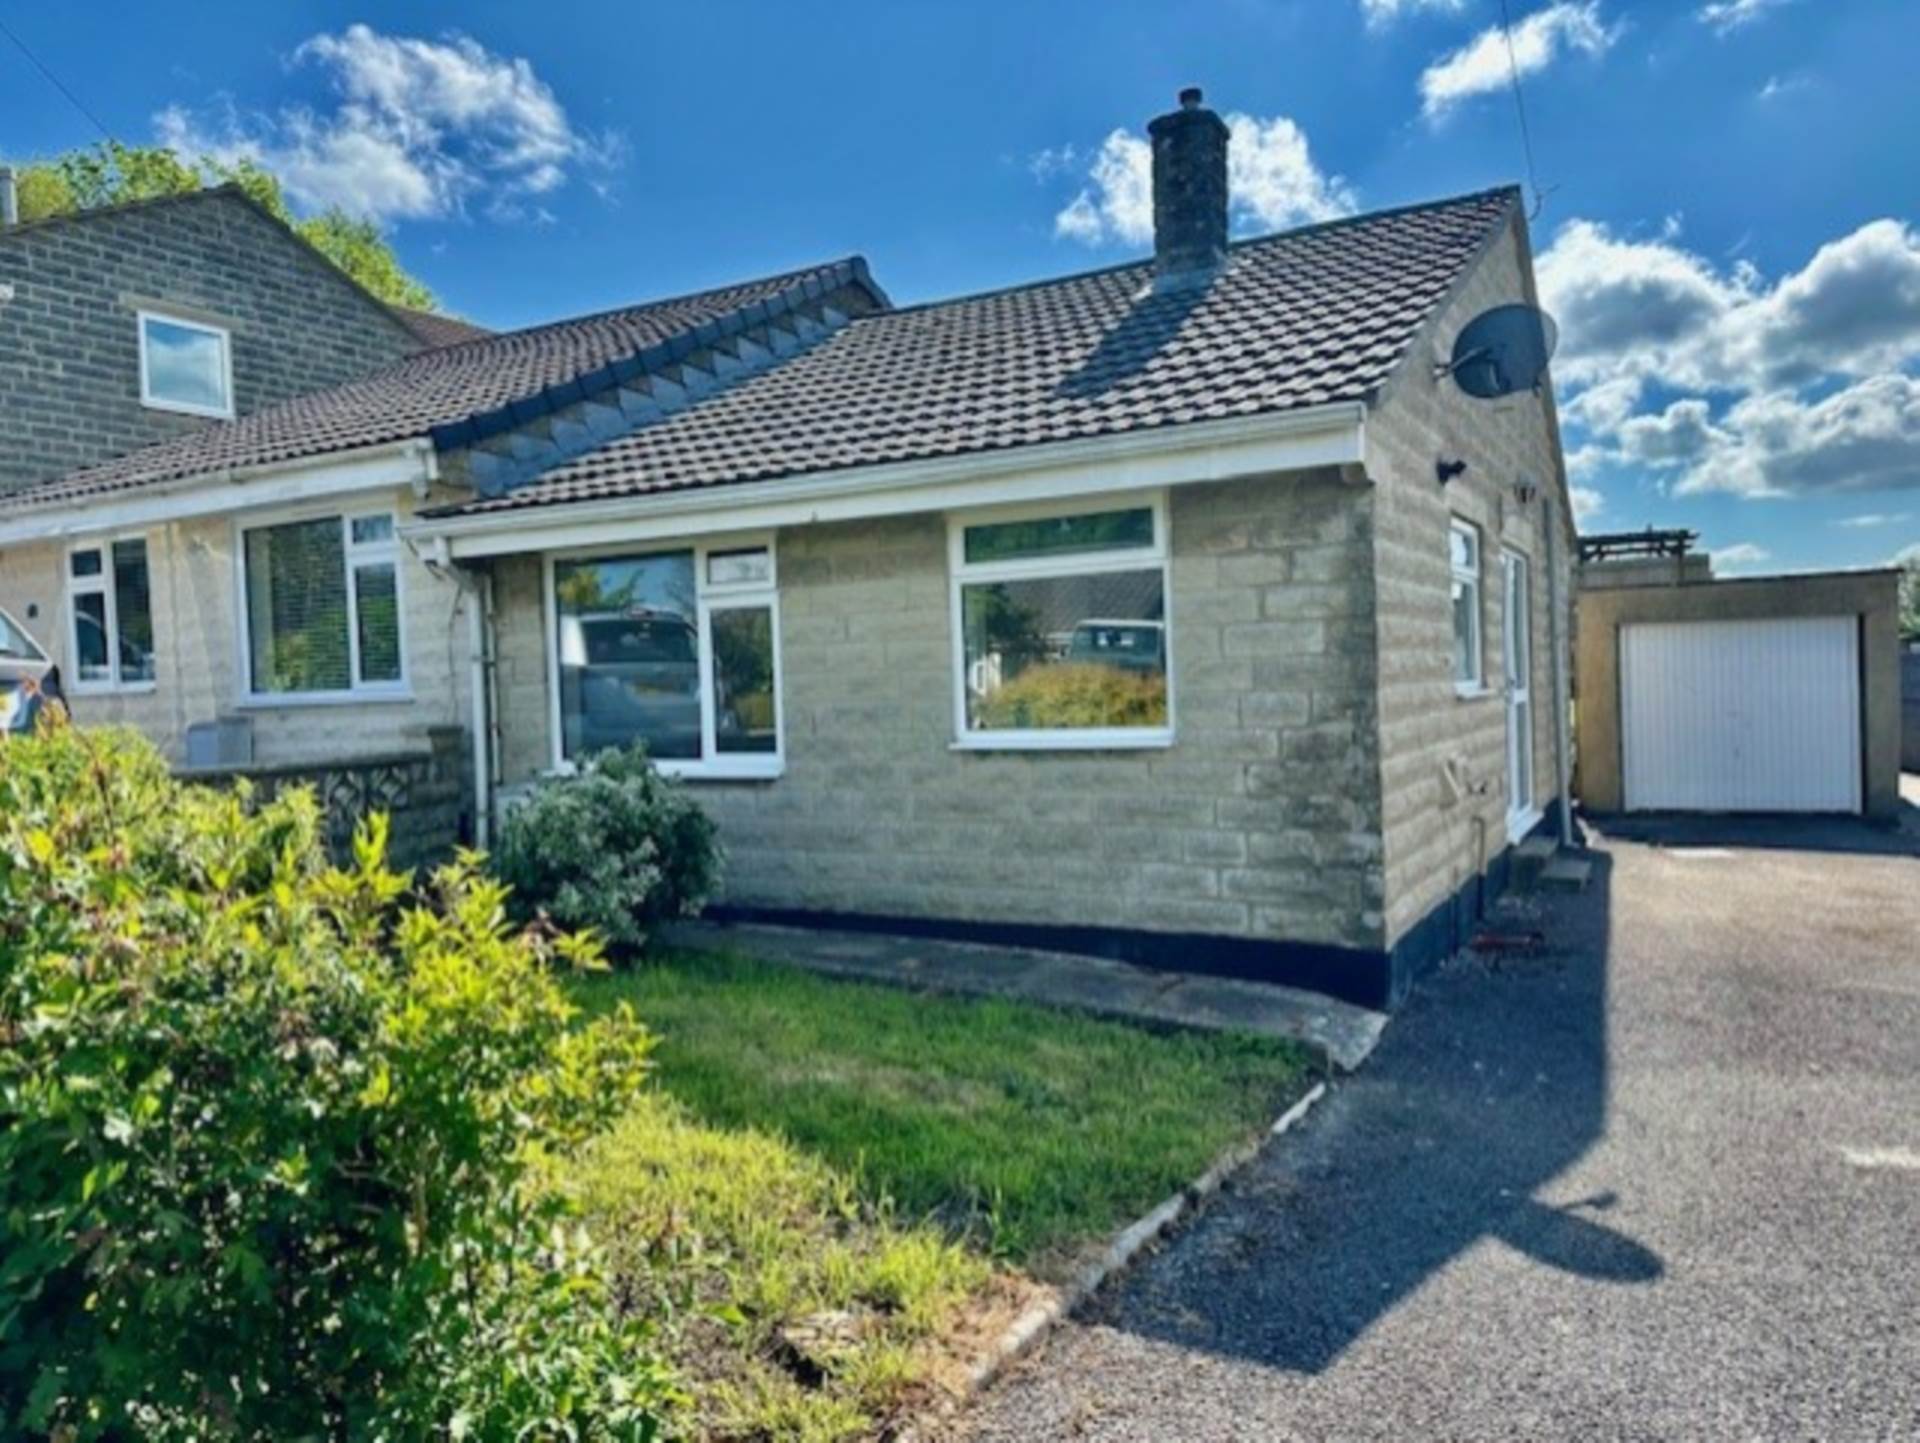 1 bed Bungalow for rent in Radstock. From Swallows Property Letting - Frome